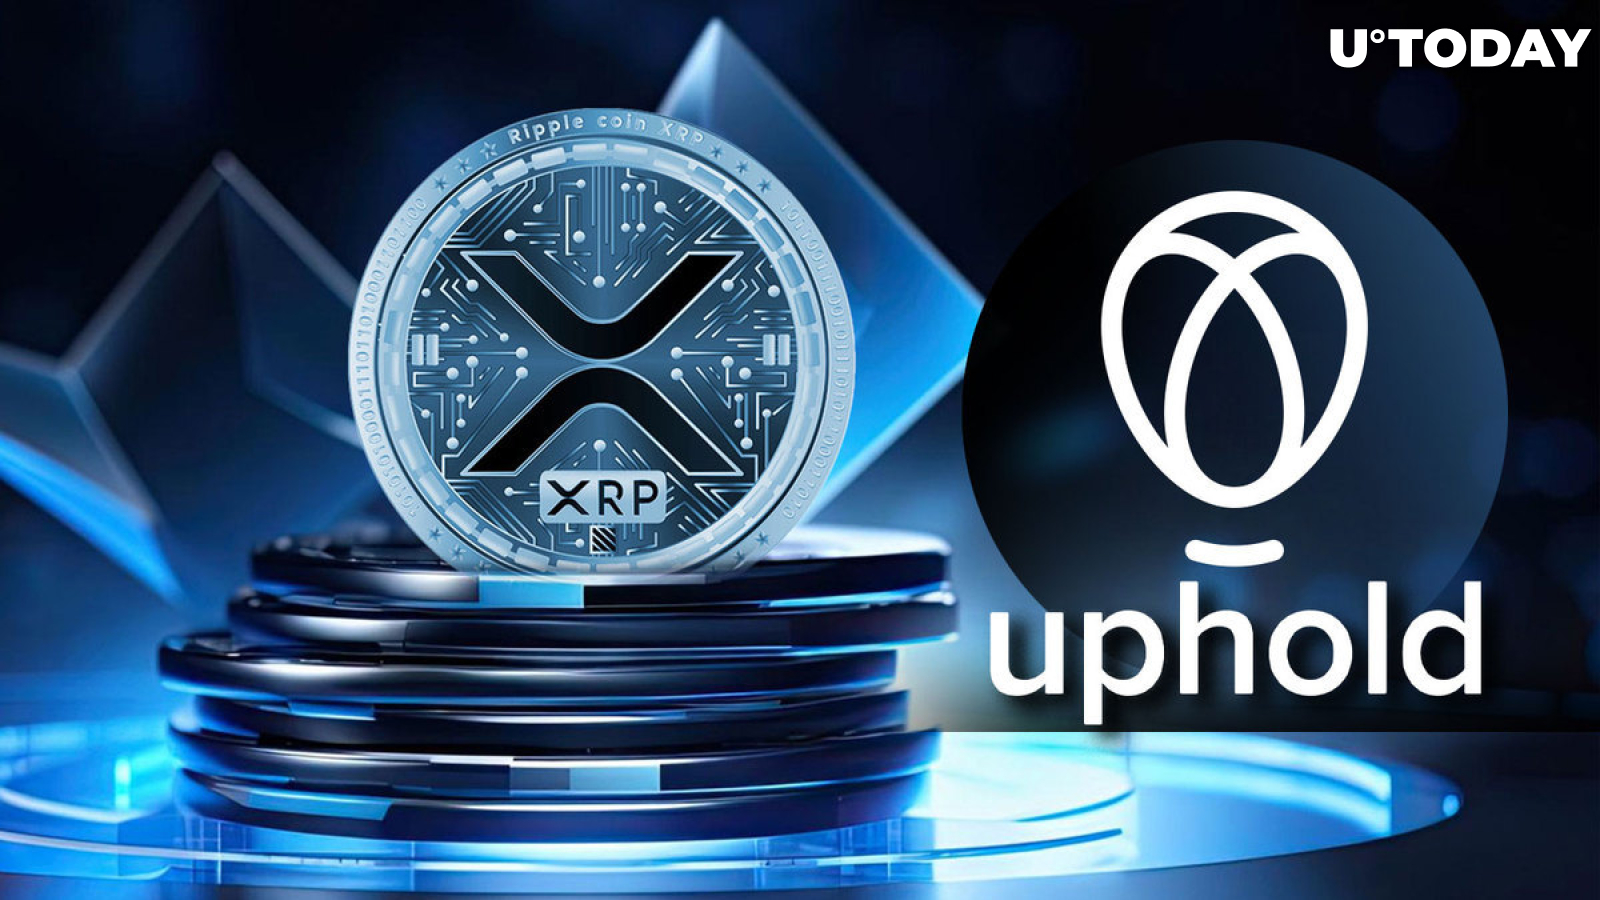 Uphold Enters XRP Custody Scene, Here's What This Means